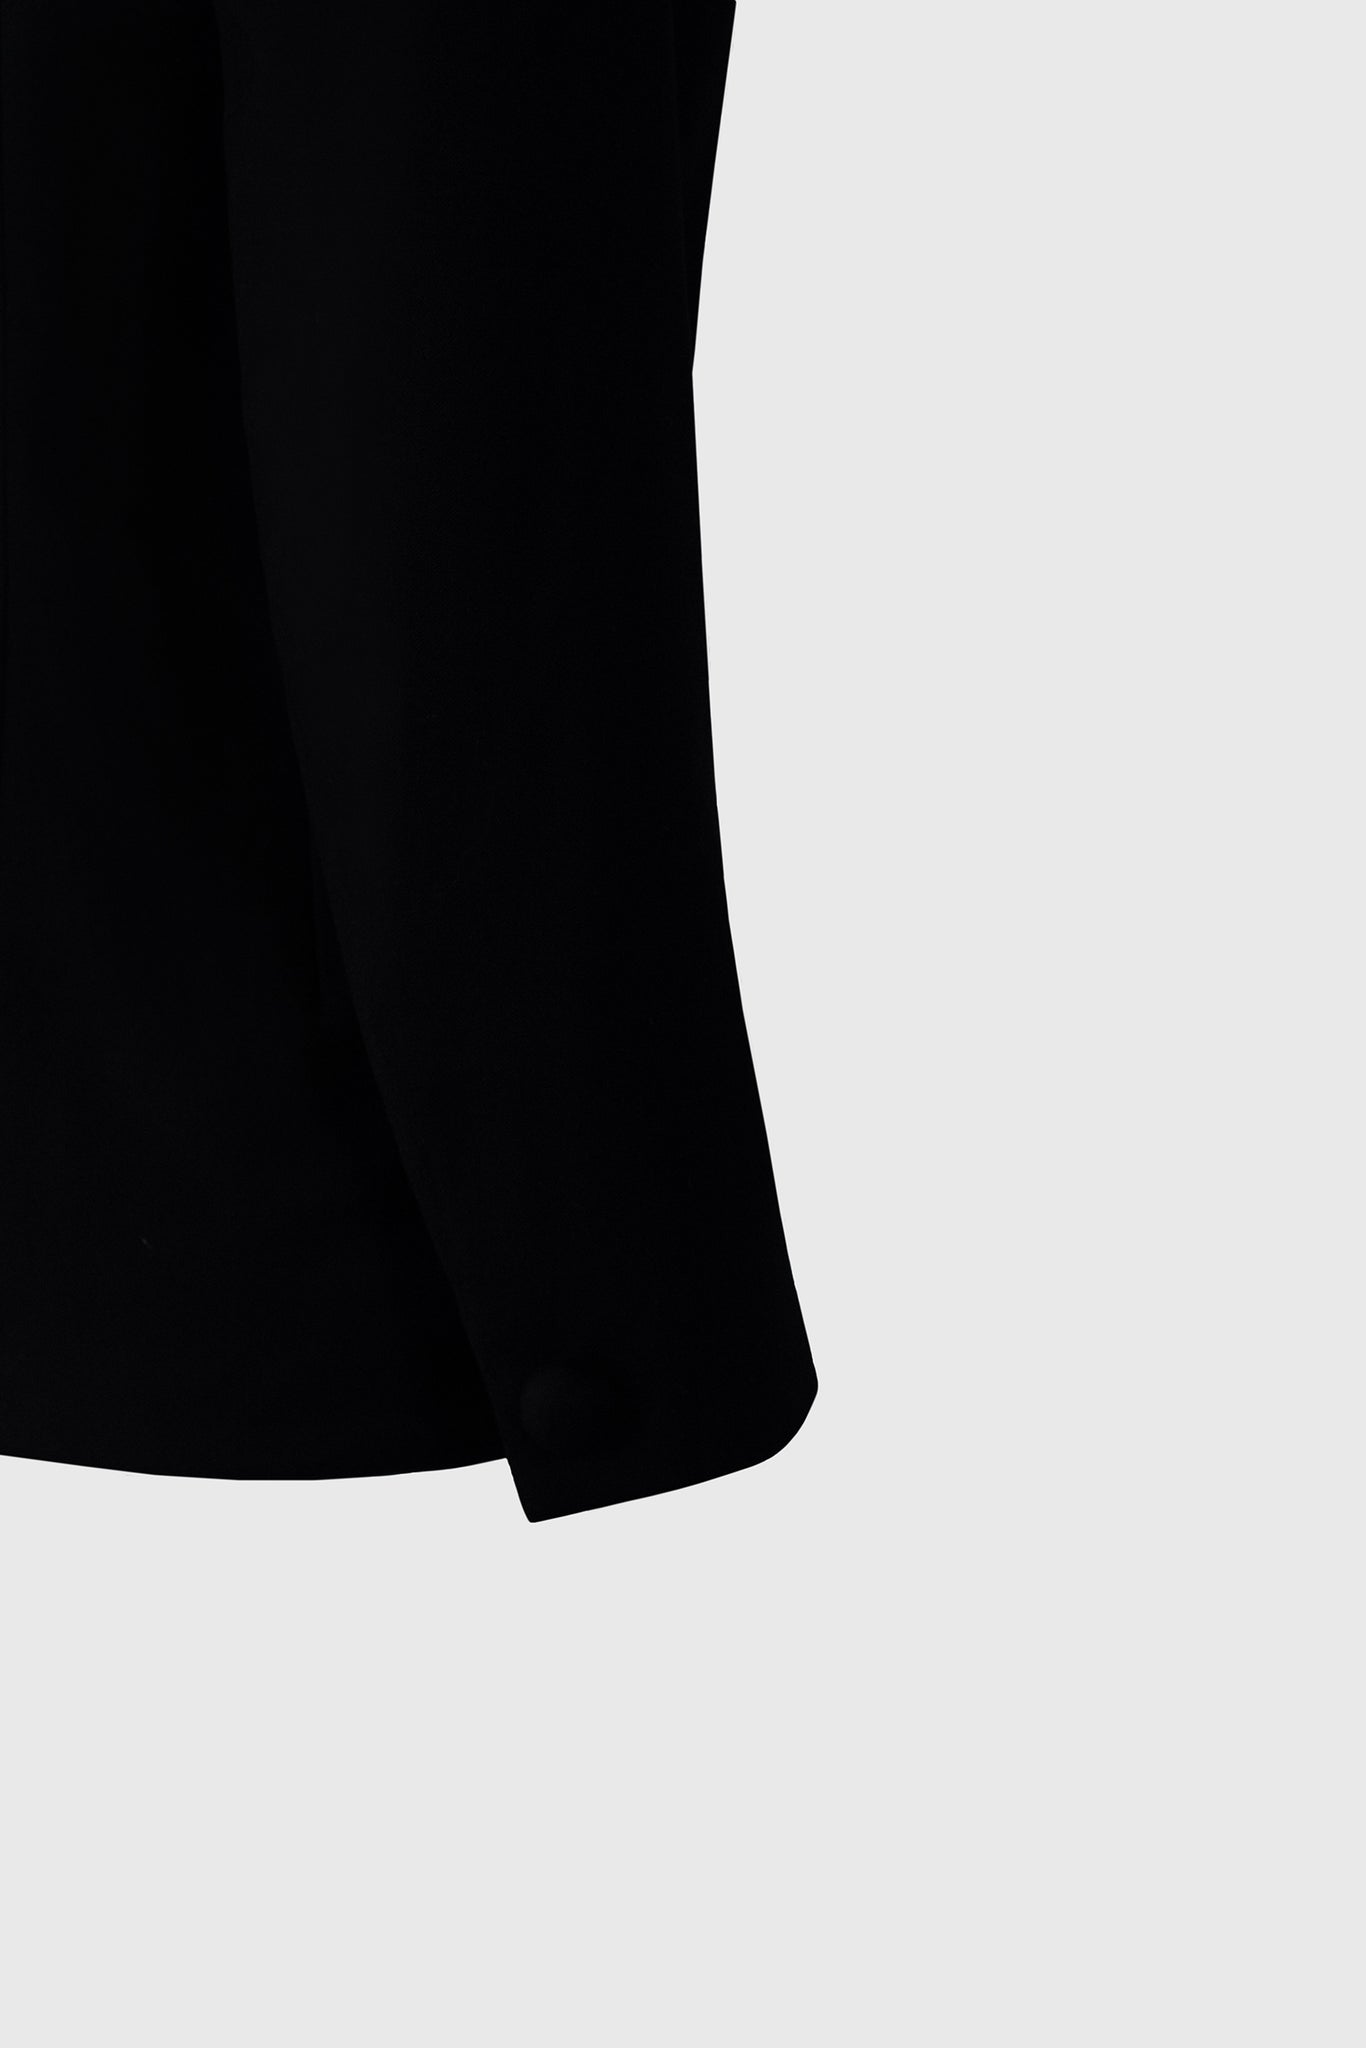 curved sleeves, fitted on the curvature of the arm, special tailoring for women, bespoke, matching cuff covered buttons